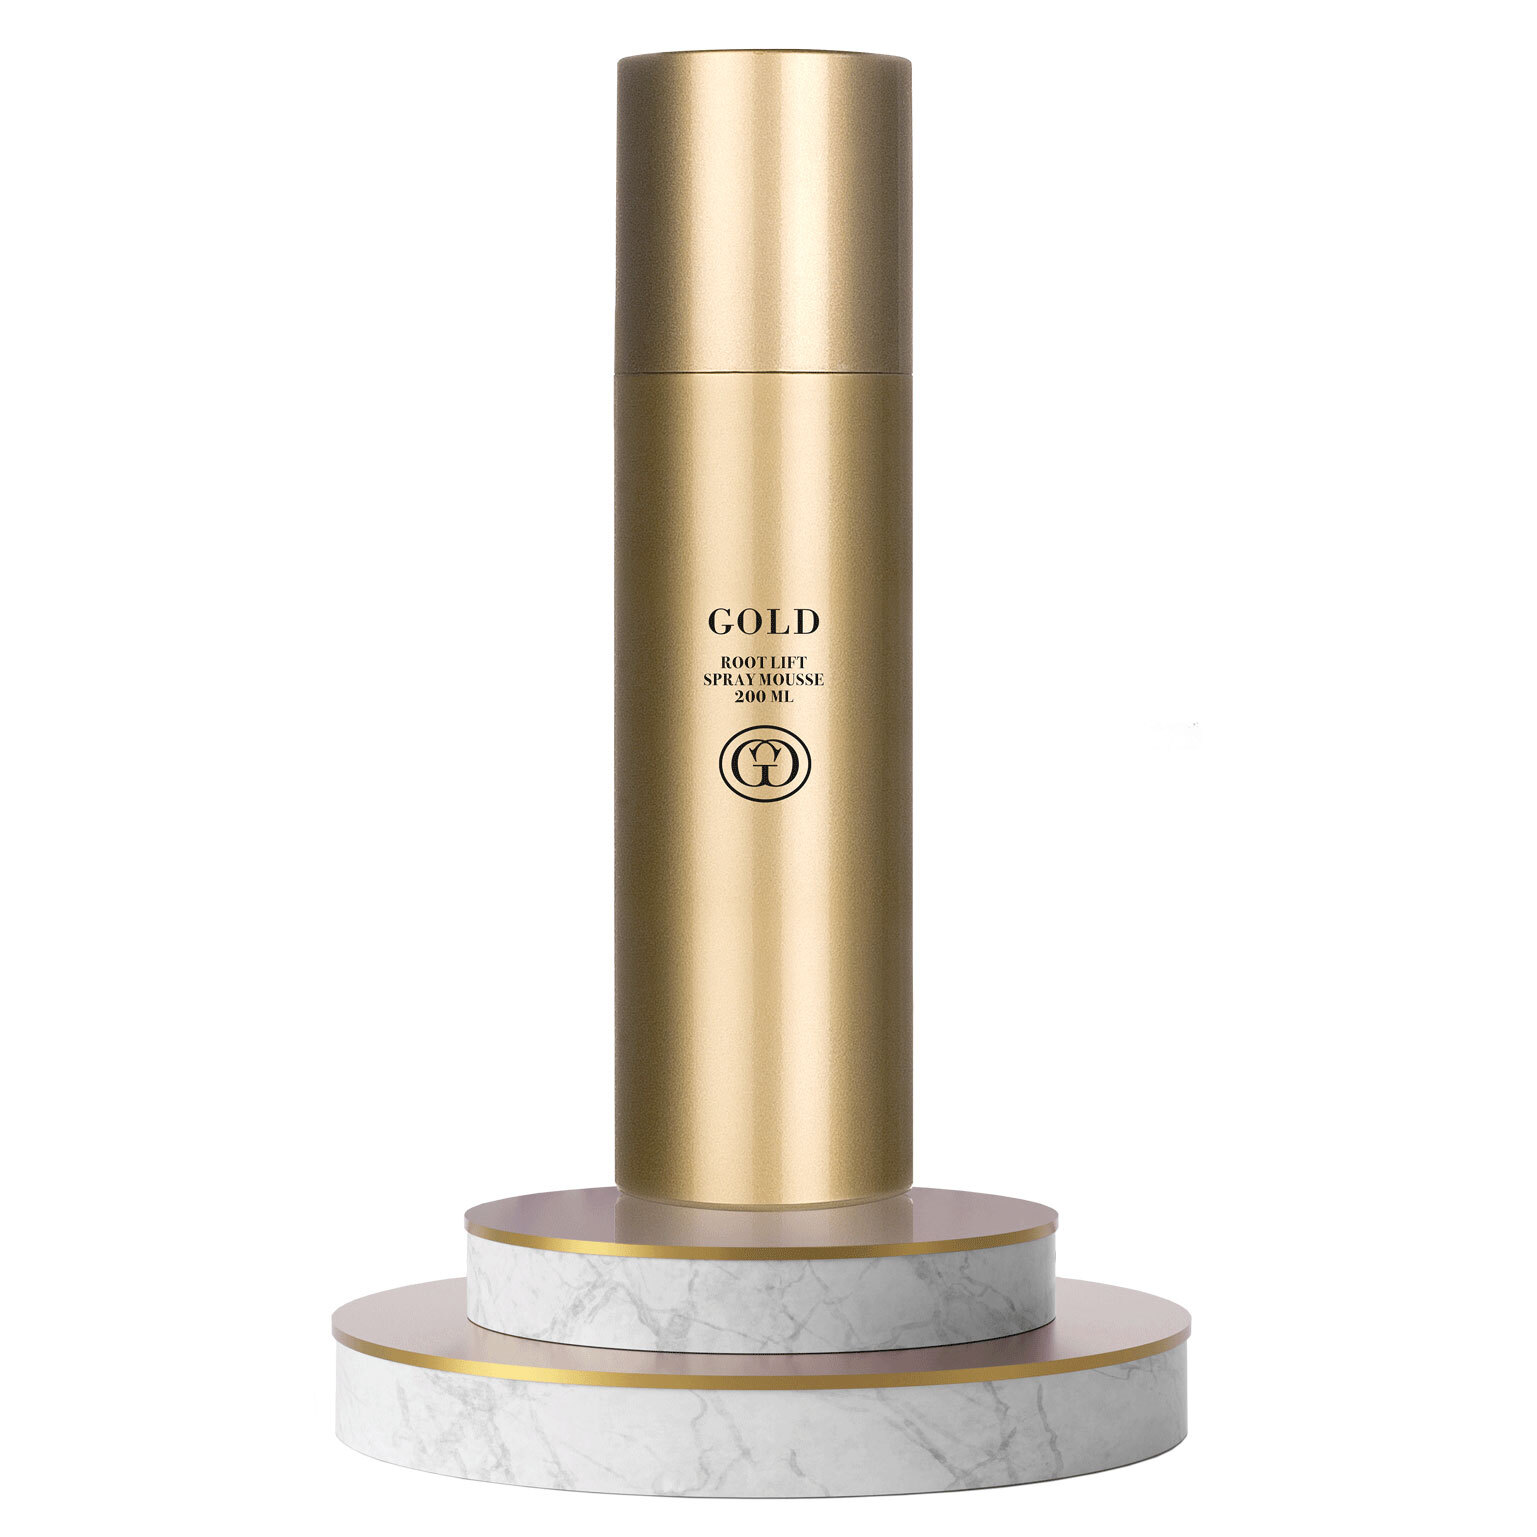 Gold Professional Styling Root Lift Spray Mousse